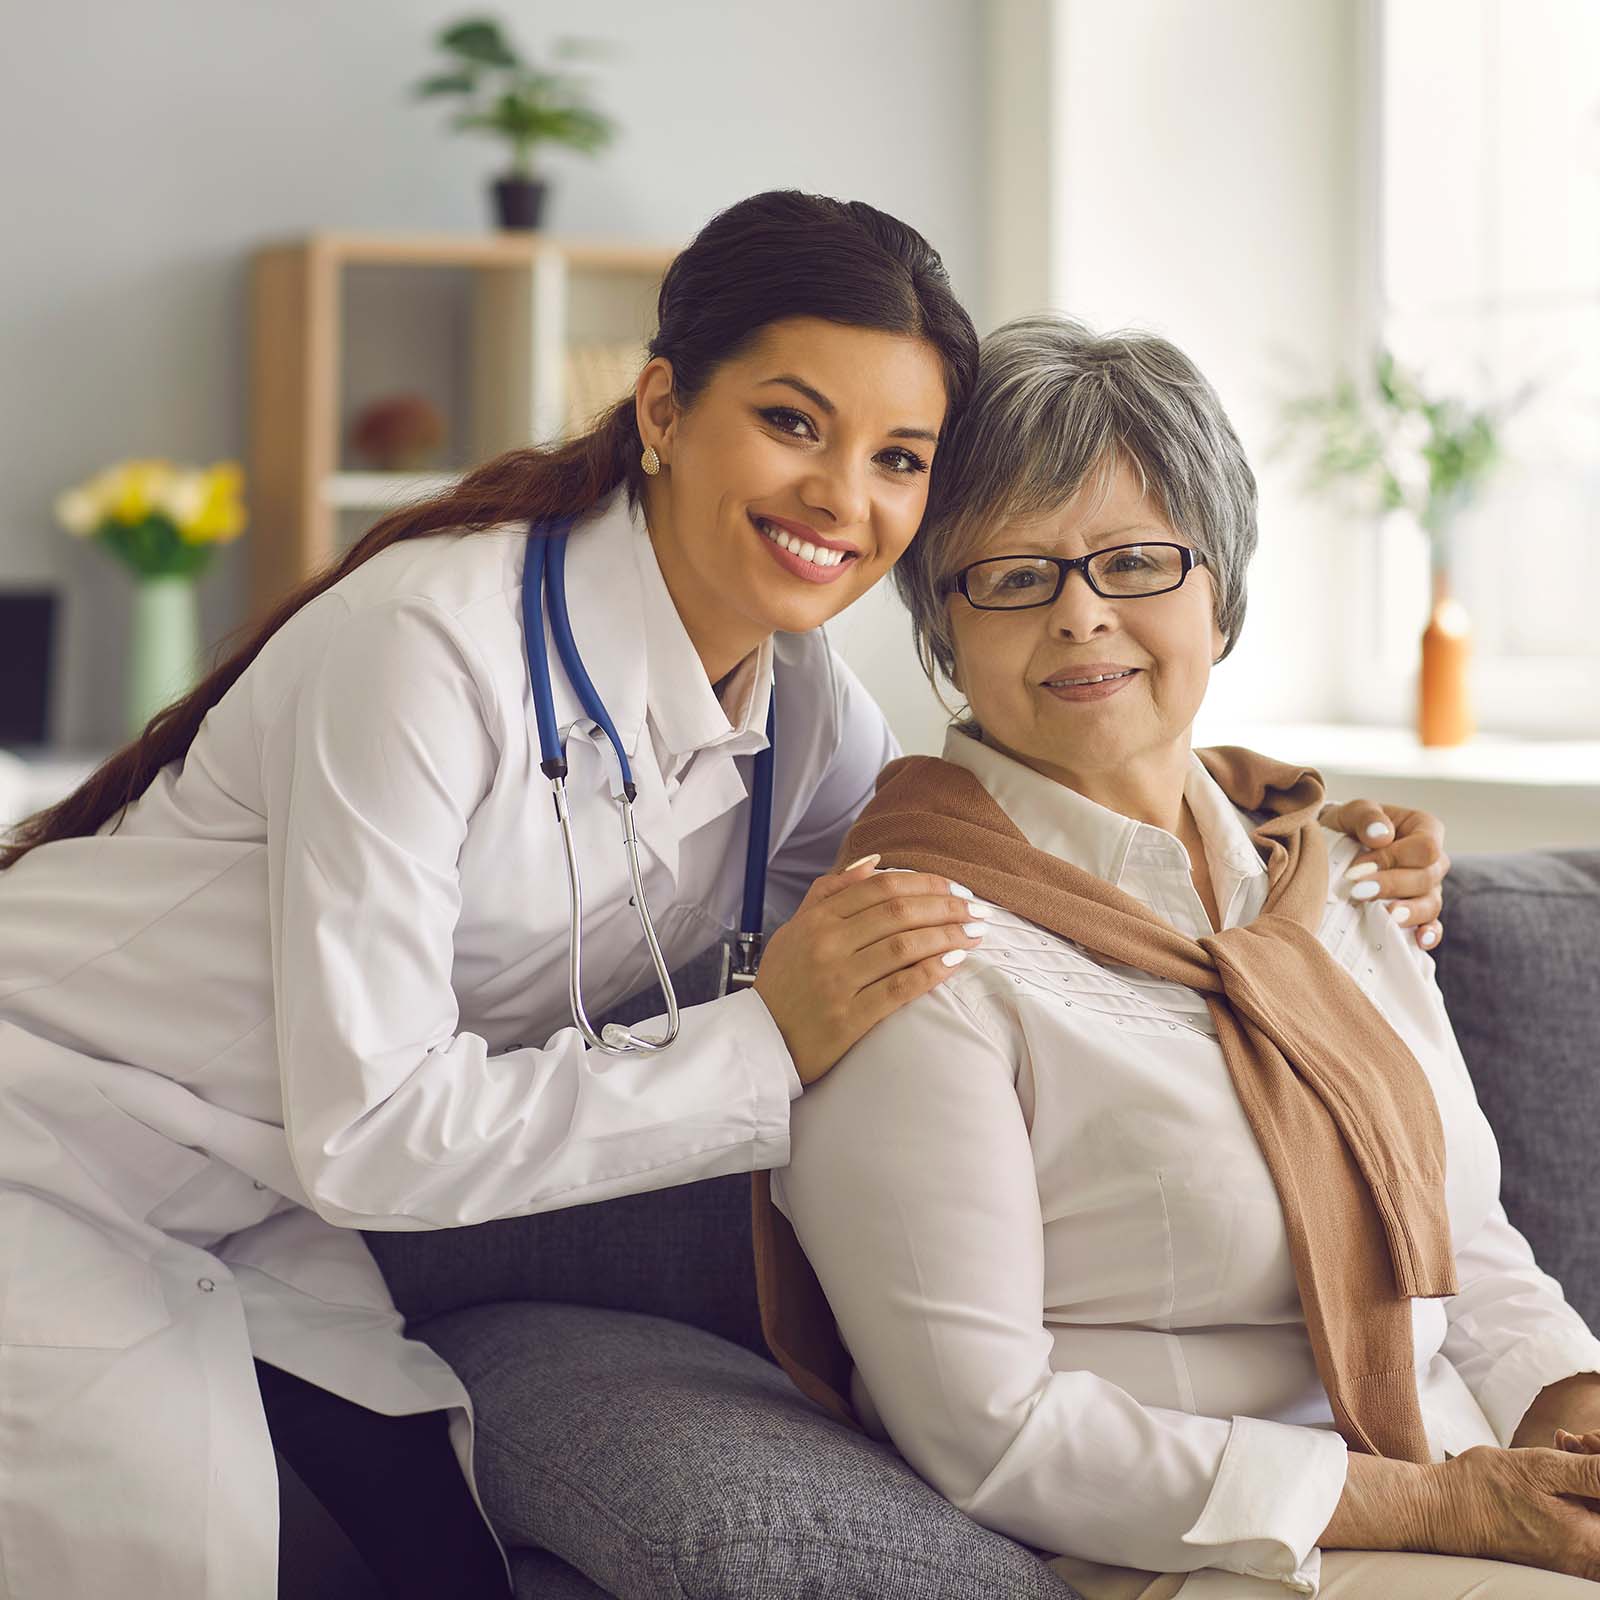 A physician posing next to older patient who is sitting on the couch